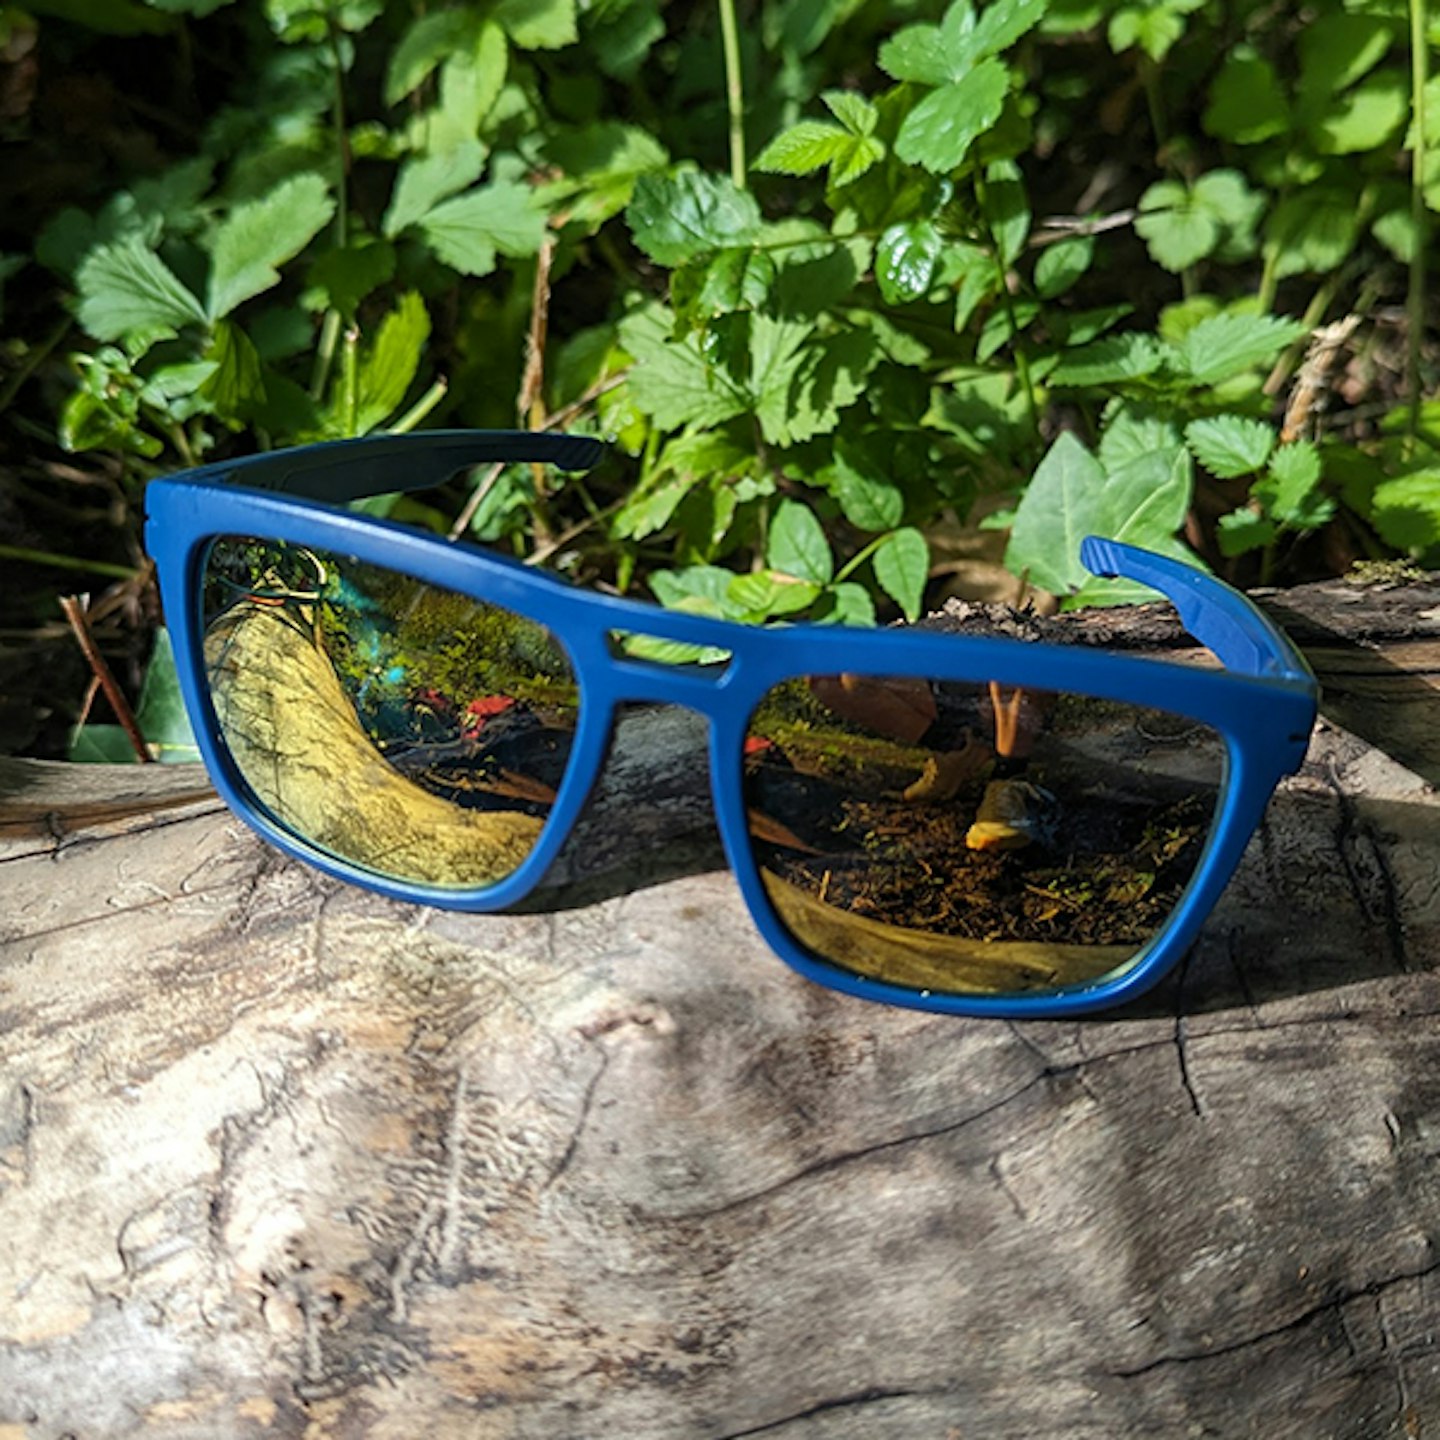 Sungod Tempest sunglasses for running and hiking at love trails